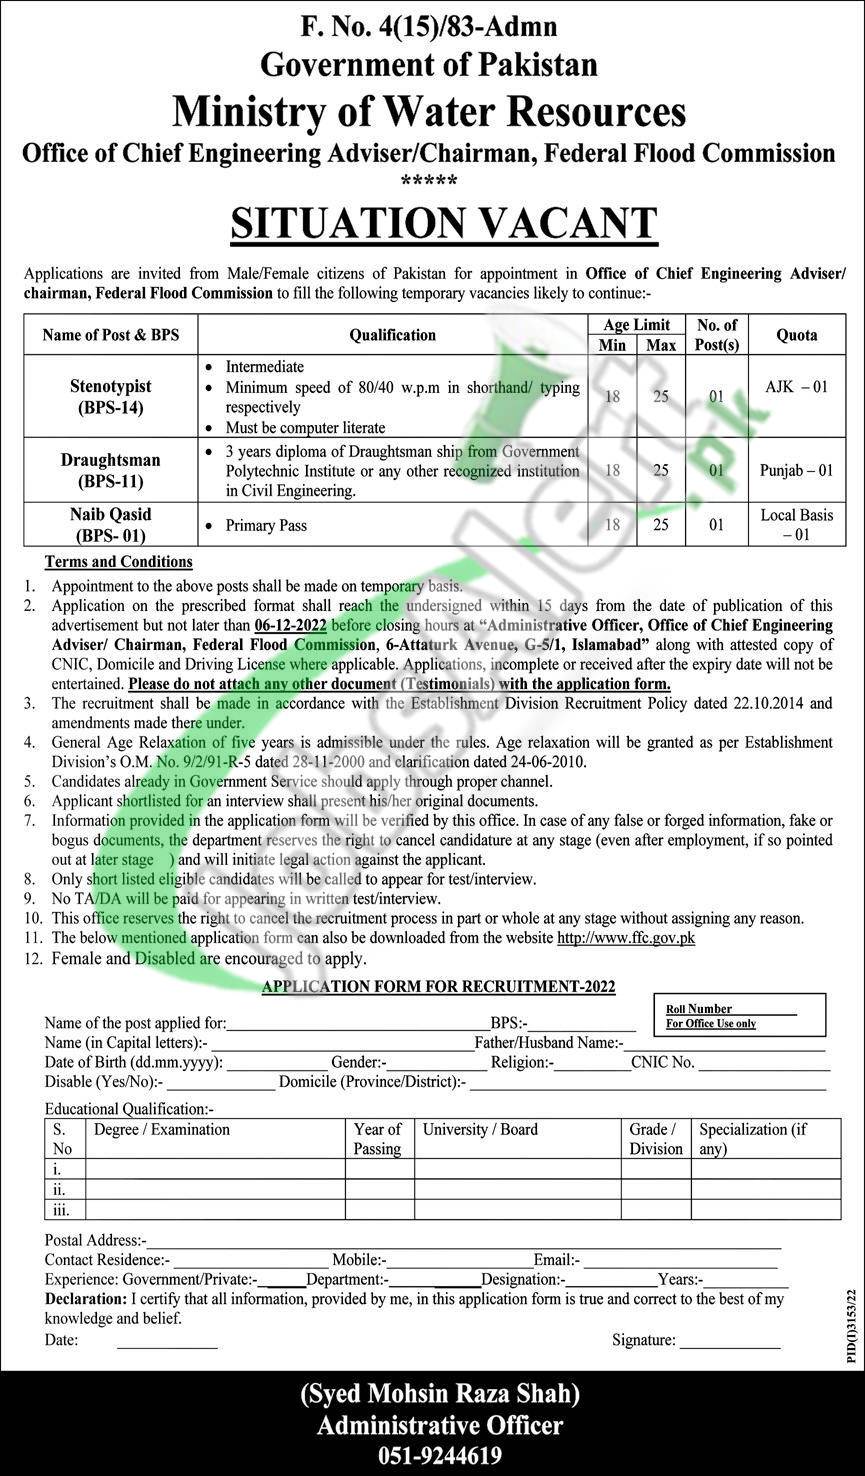 Ministry of Water Resources Jobs